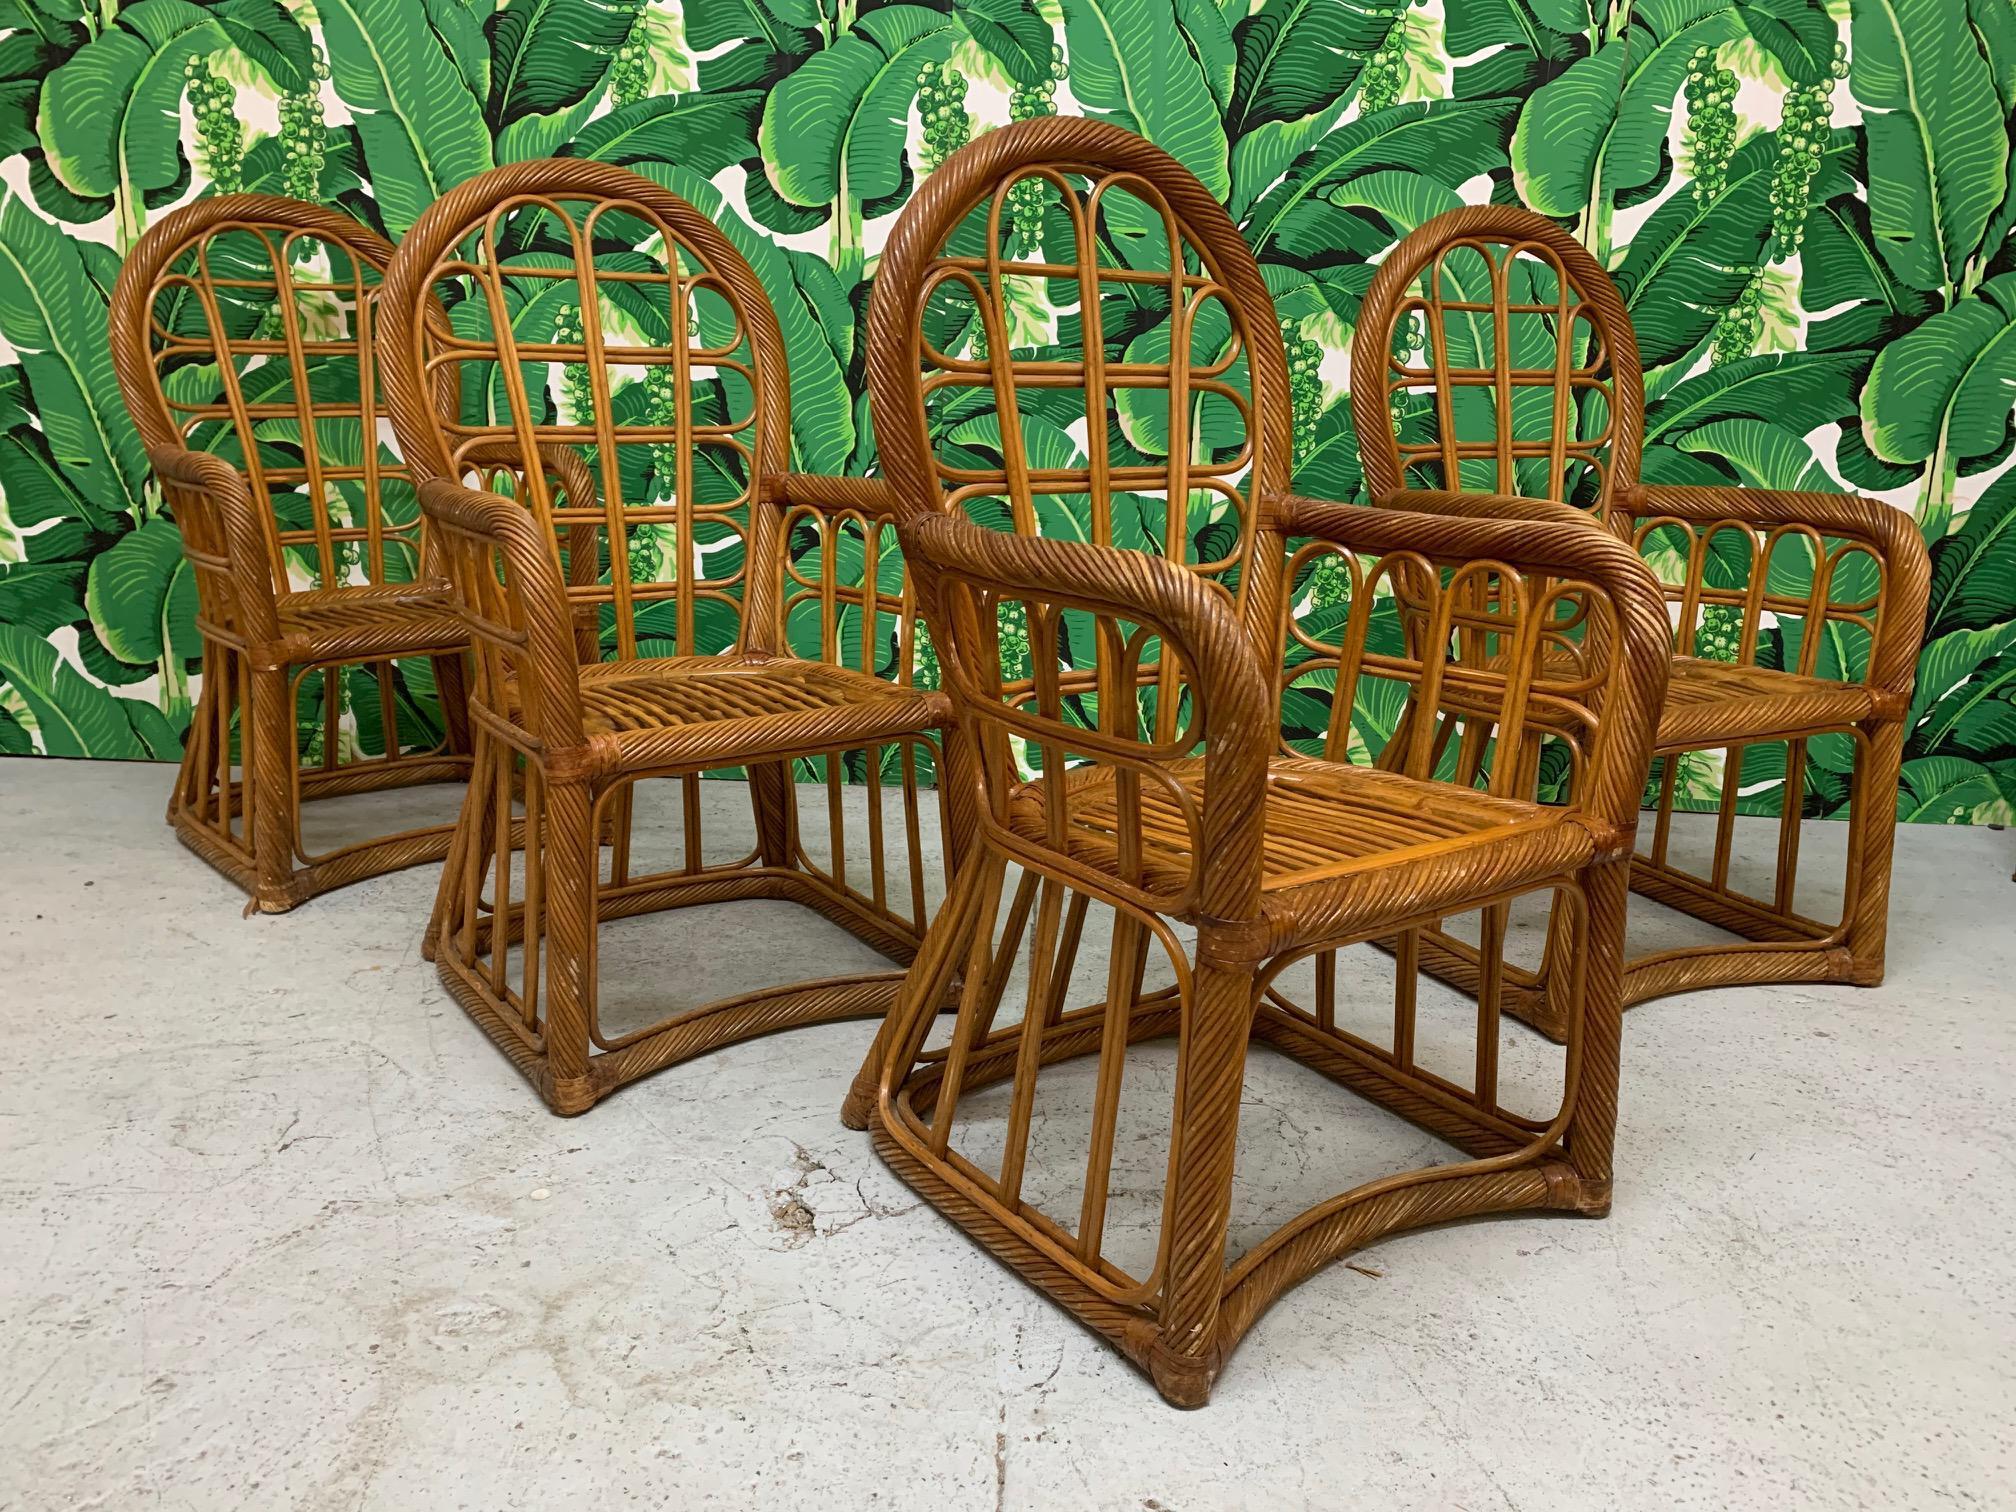 Set of 4 dining chairs feature a twisted rattan design with high backs and splayed legs. Good vintage condition with imperfections consistent with age, see photos for condition details.